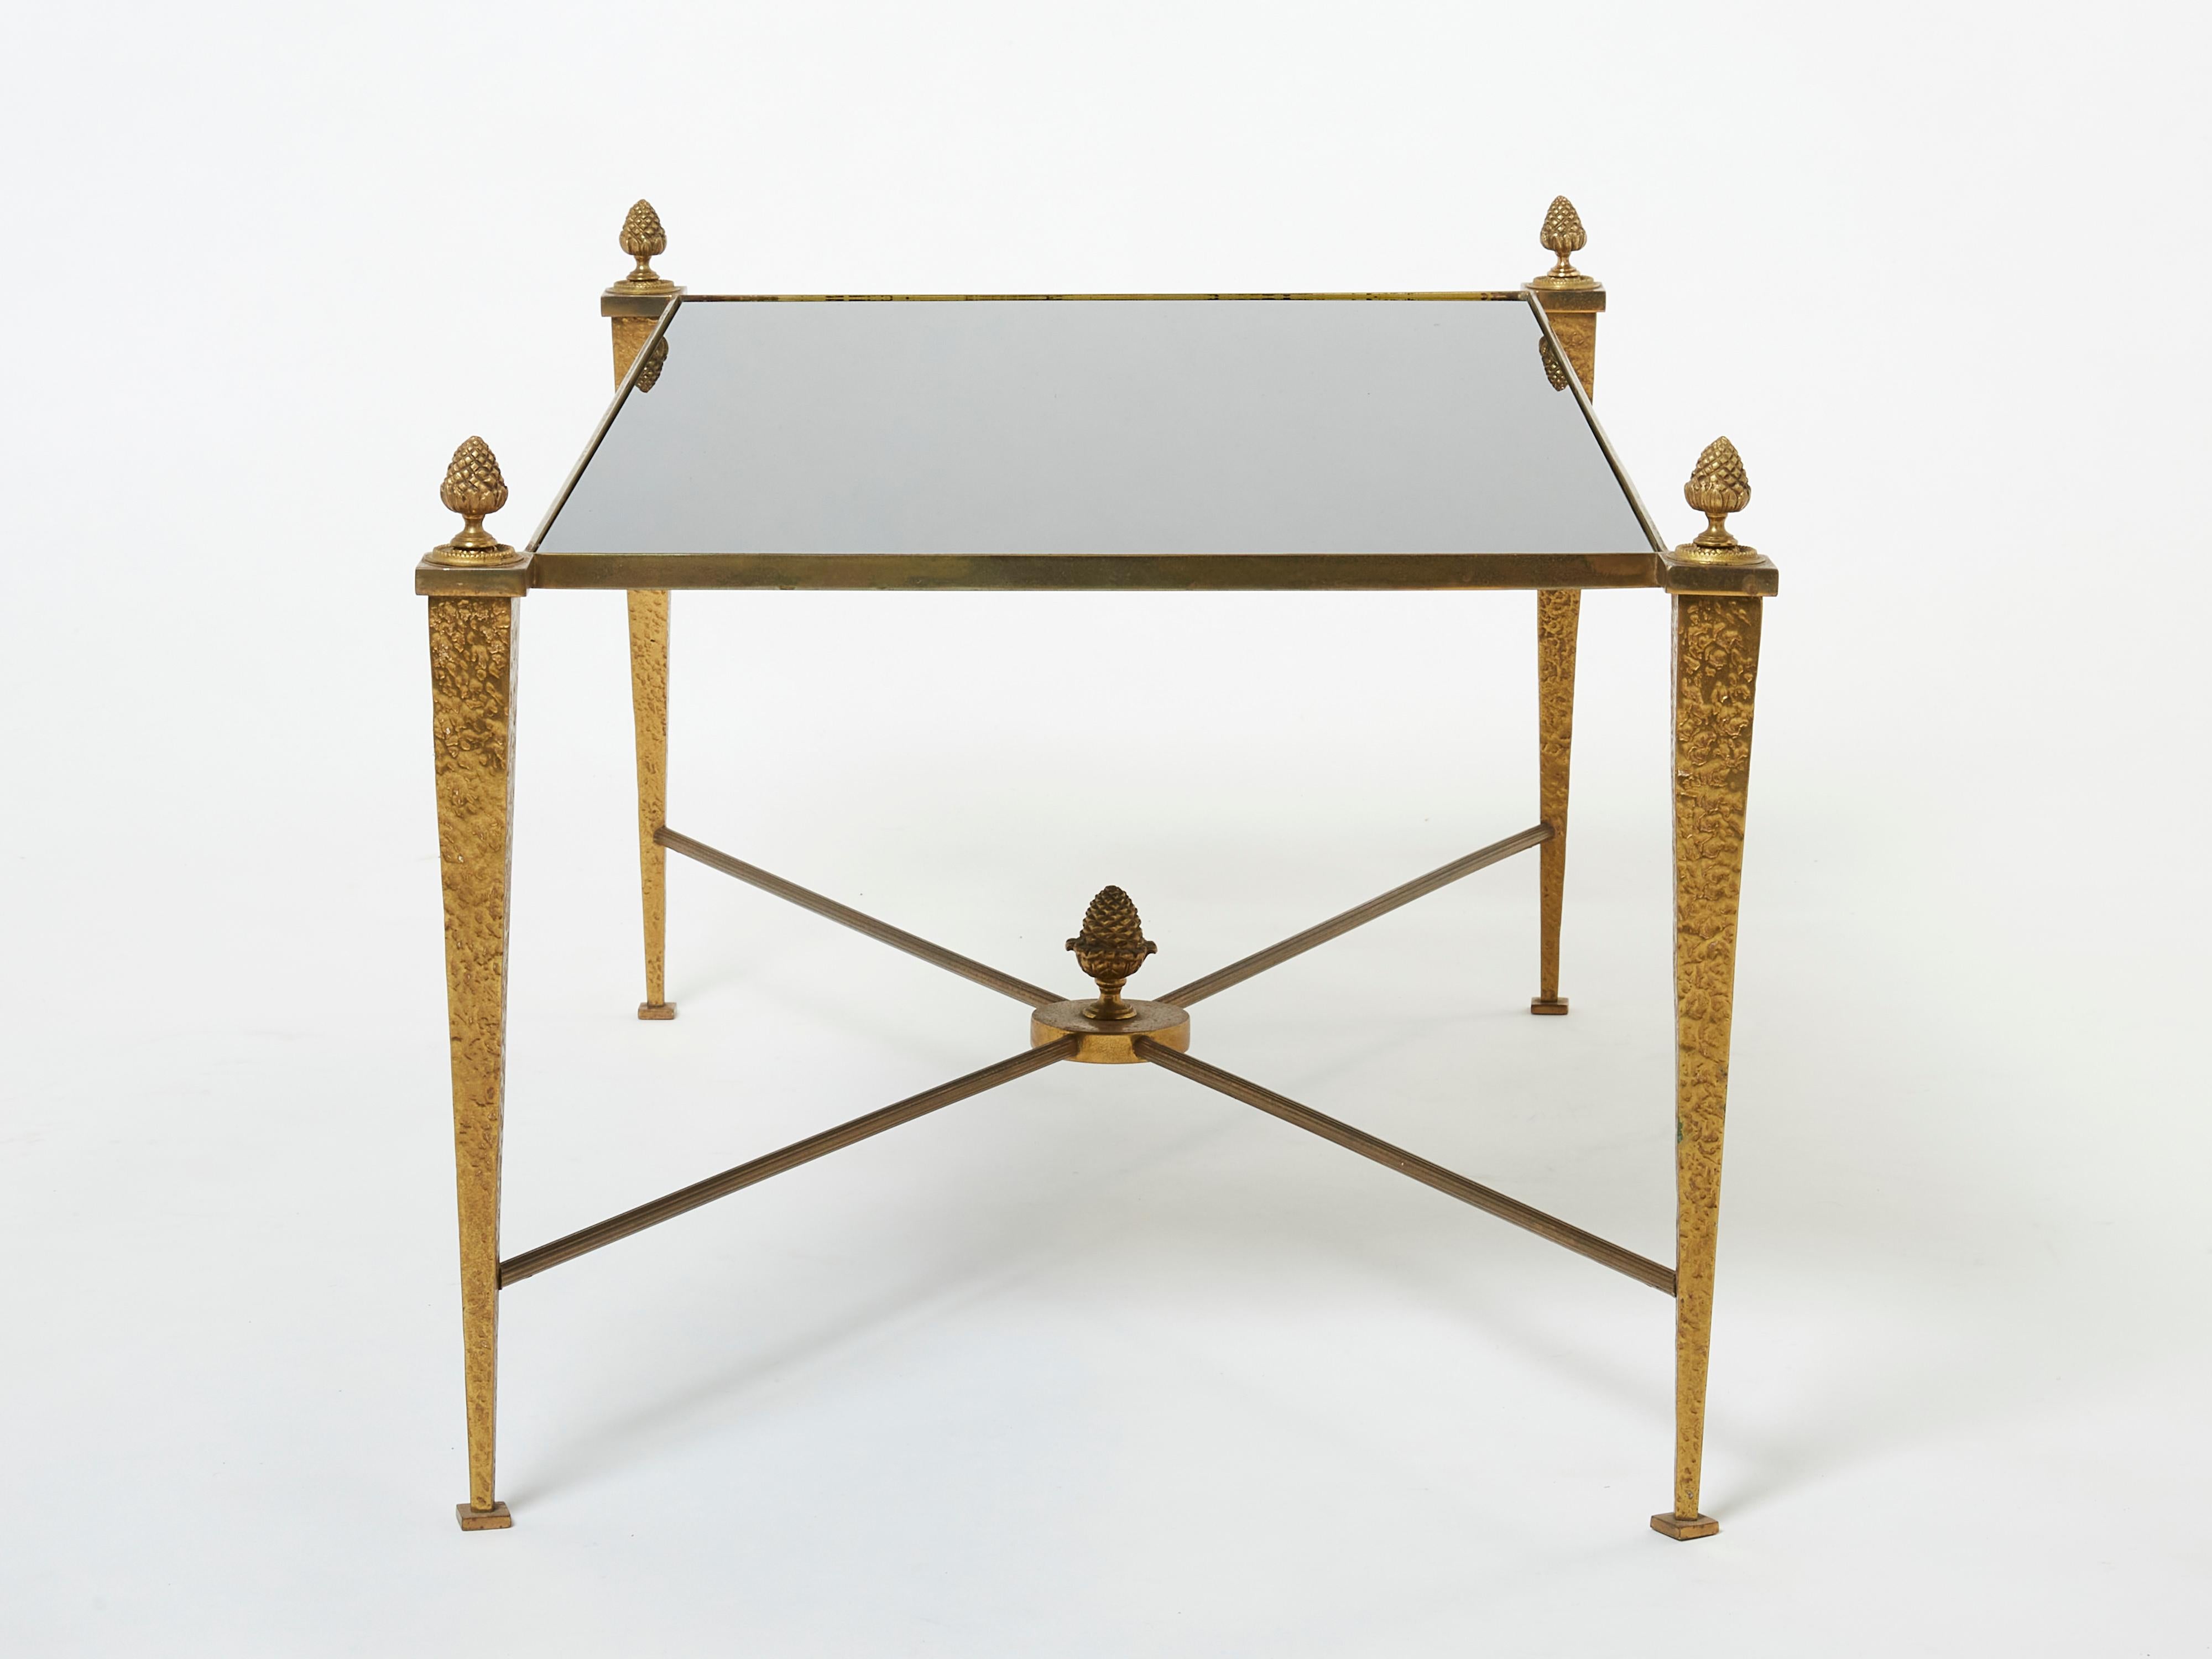 French Maison Ramsay Gilded Wrought Iron Opaline Coffee Table, 1960s For Sale 2